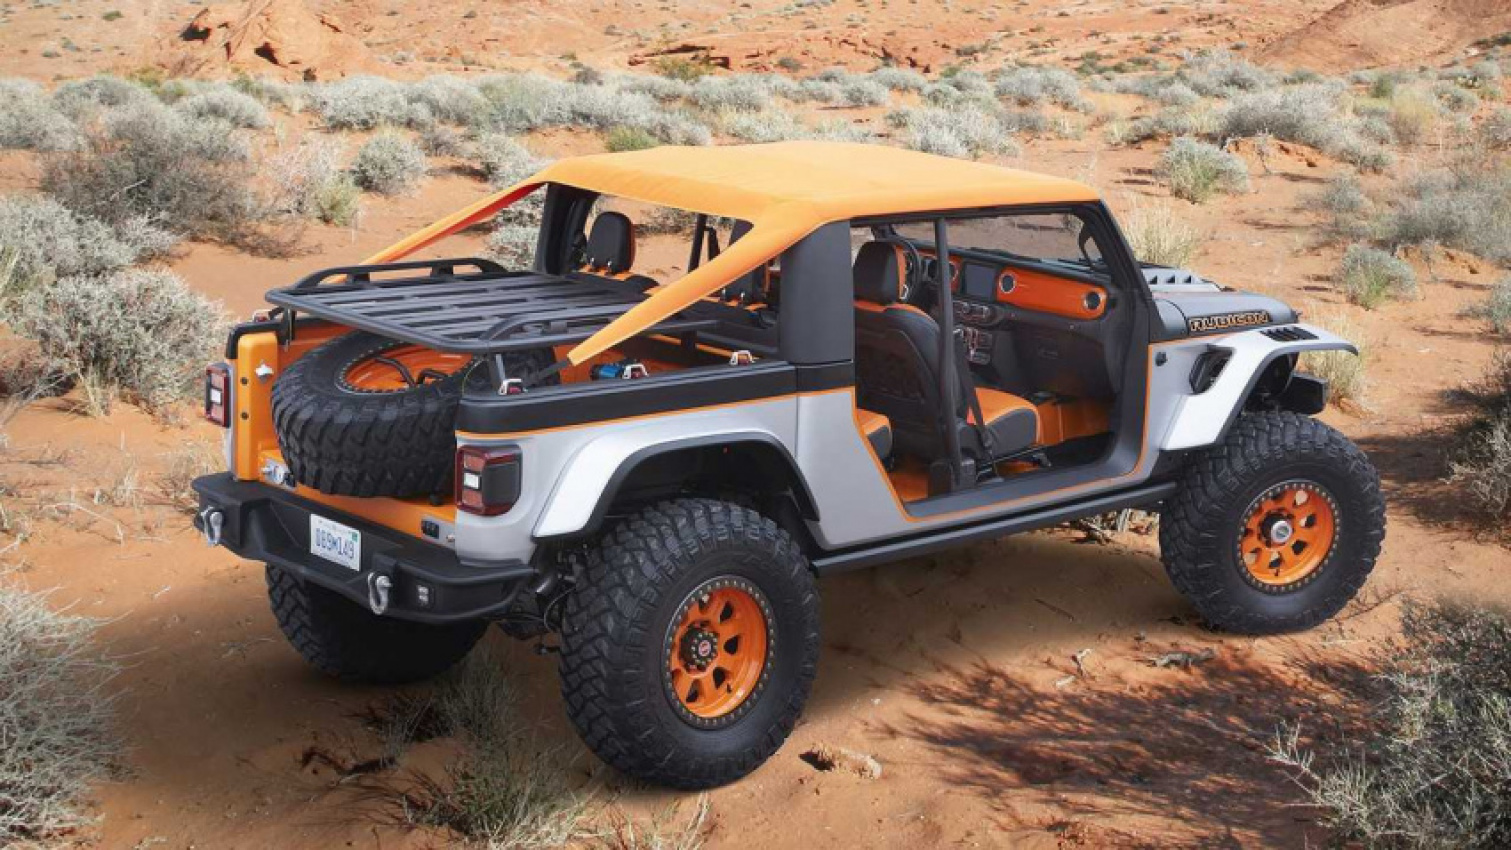 autos, cars, jeep, video: driving the best 2022 easter jeep safari concept 4x4s